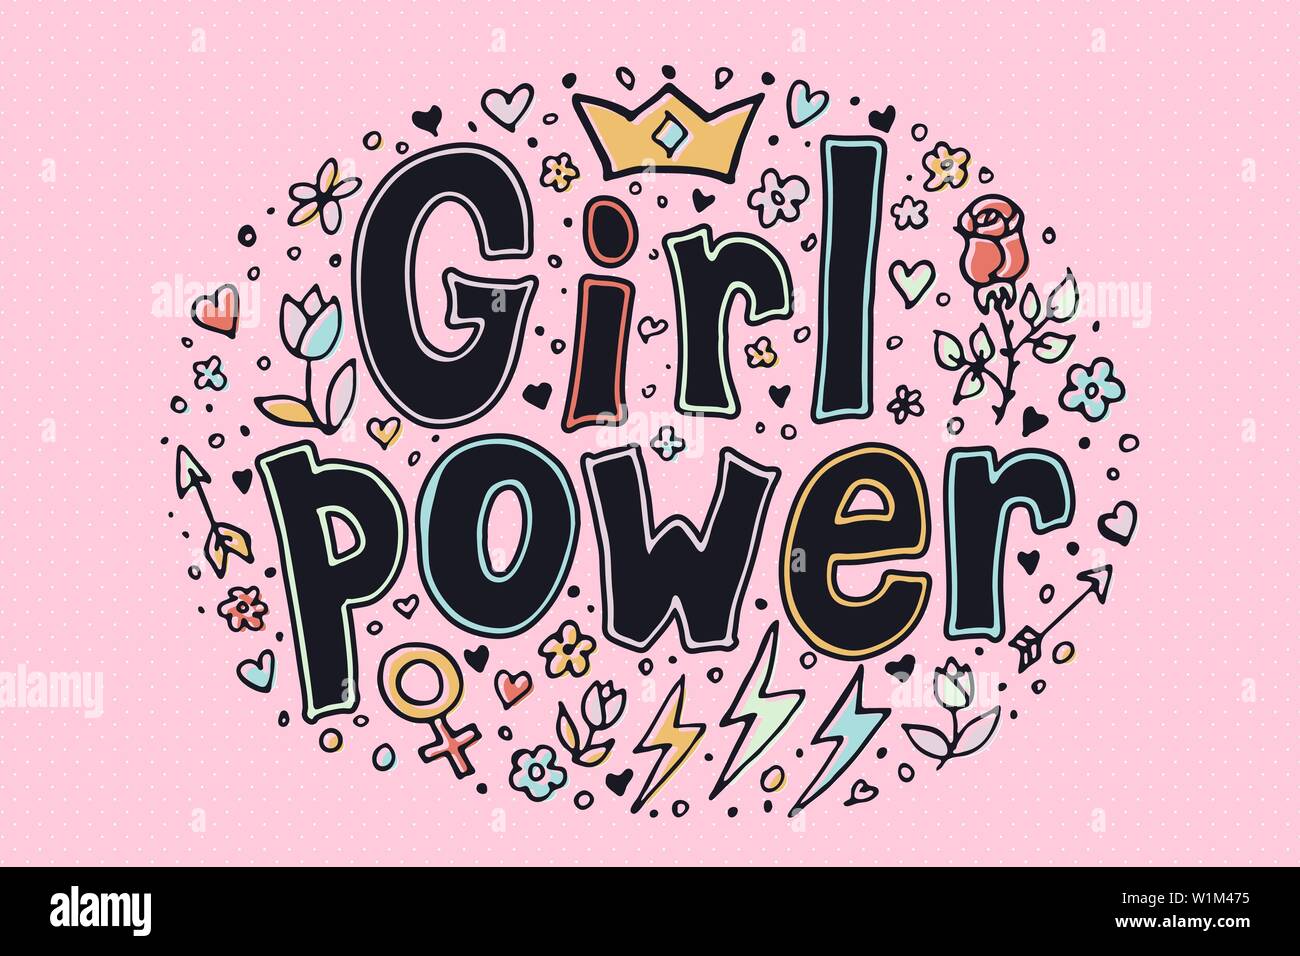 Girl power quote. Grl pwr hand drawn set. Feminism lettering. Female symbols. Vector pop art illustration. Can be used as print for poster, t shirt, postcard. Stock Vector